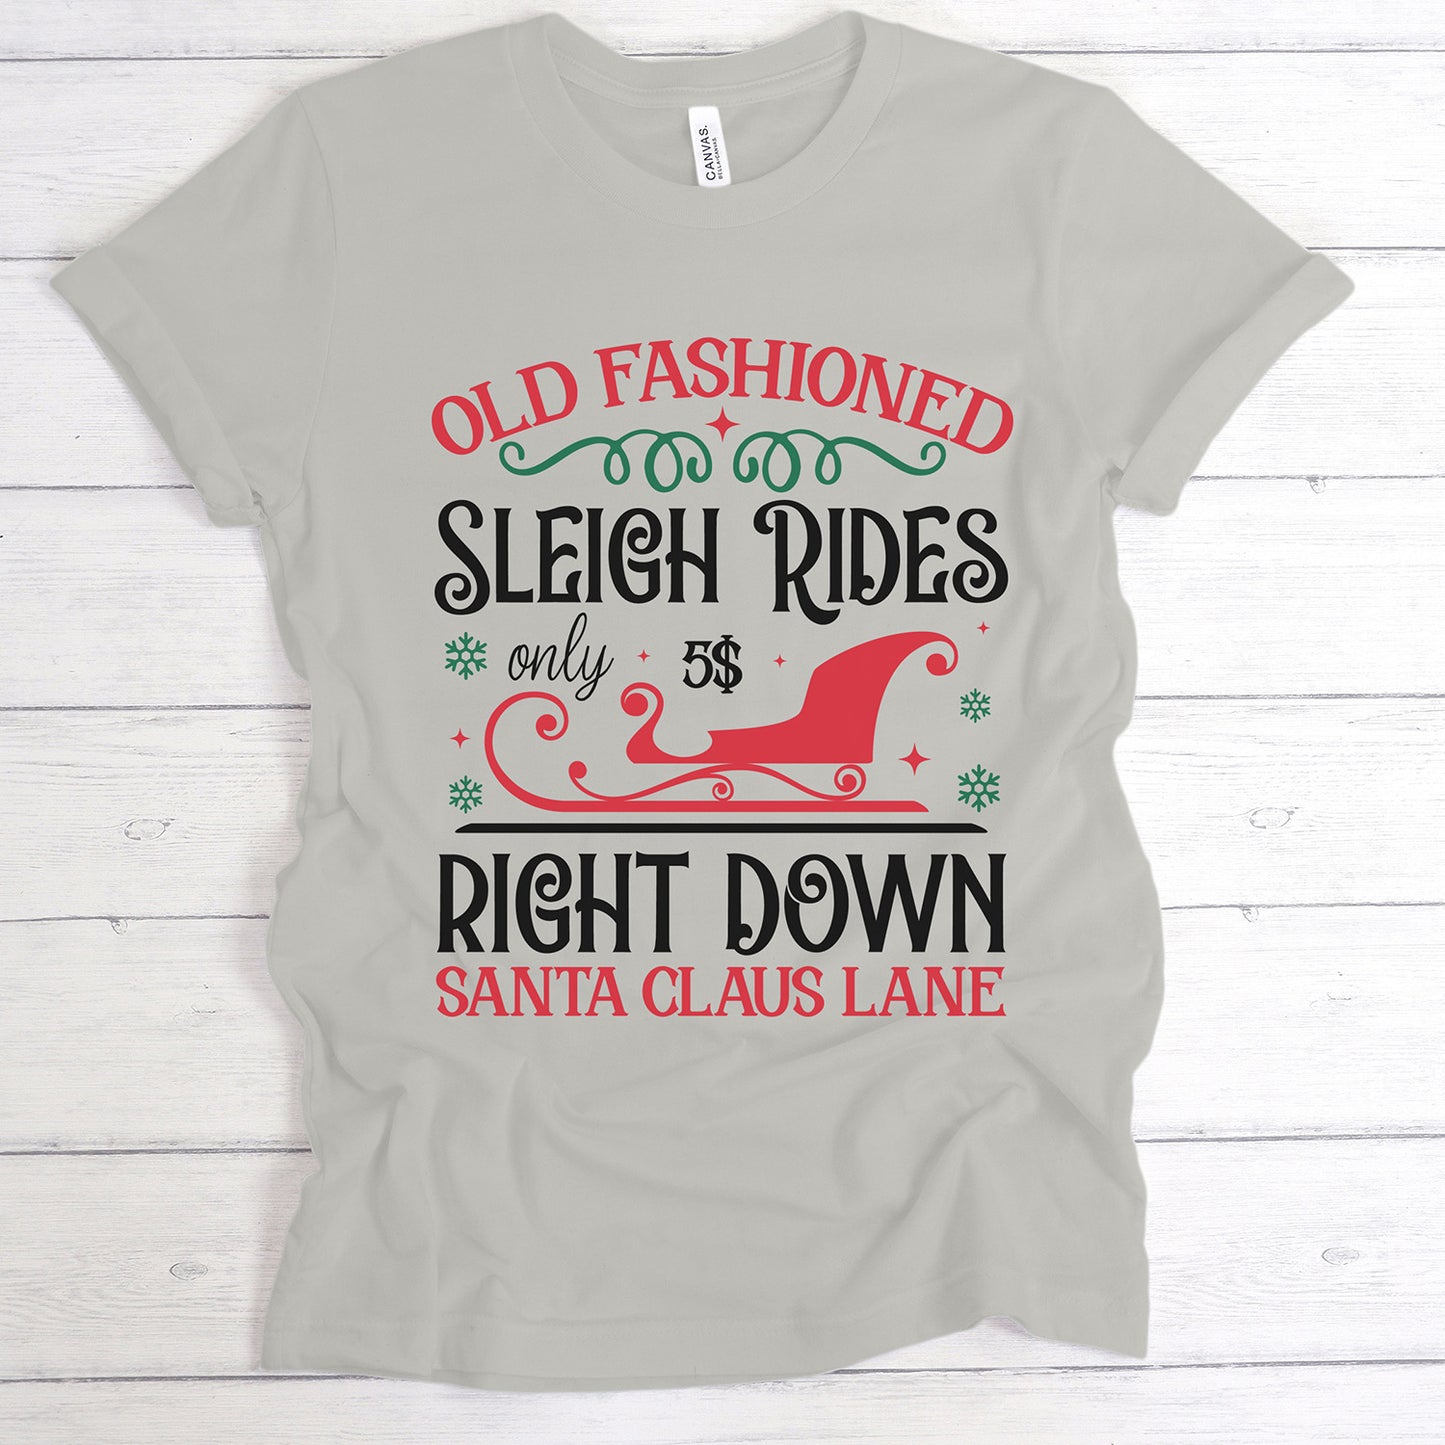 "Old Fashioned Sleigh Rides Right Down Santa Claus Lane" Graphic